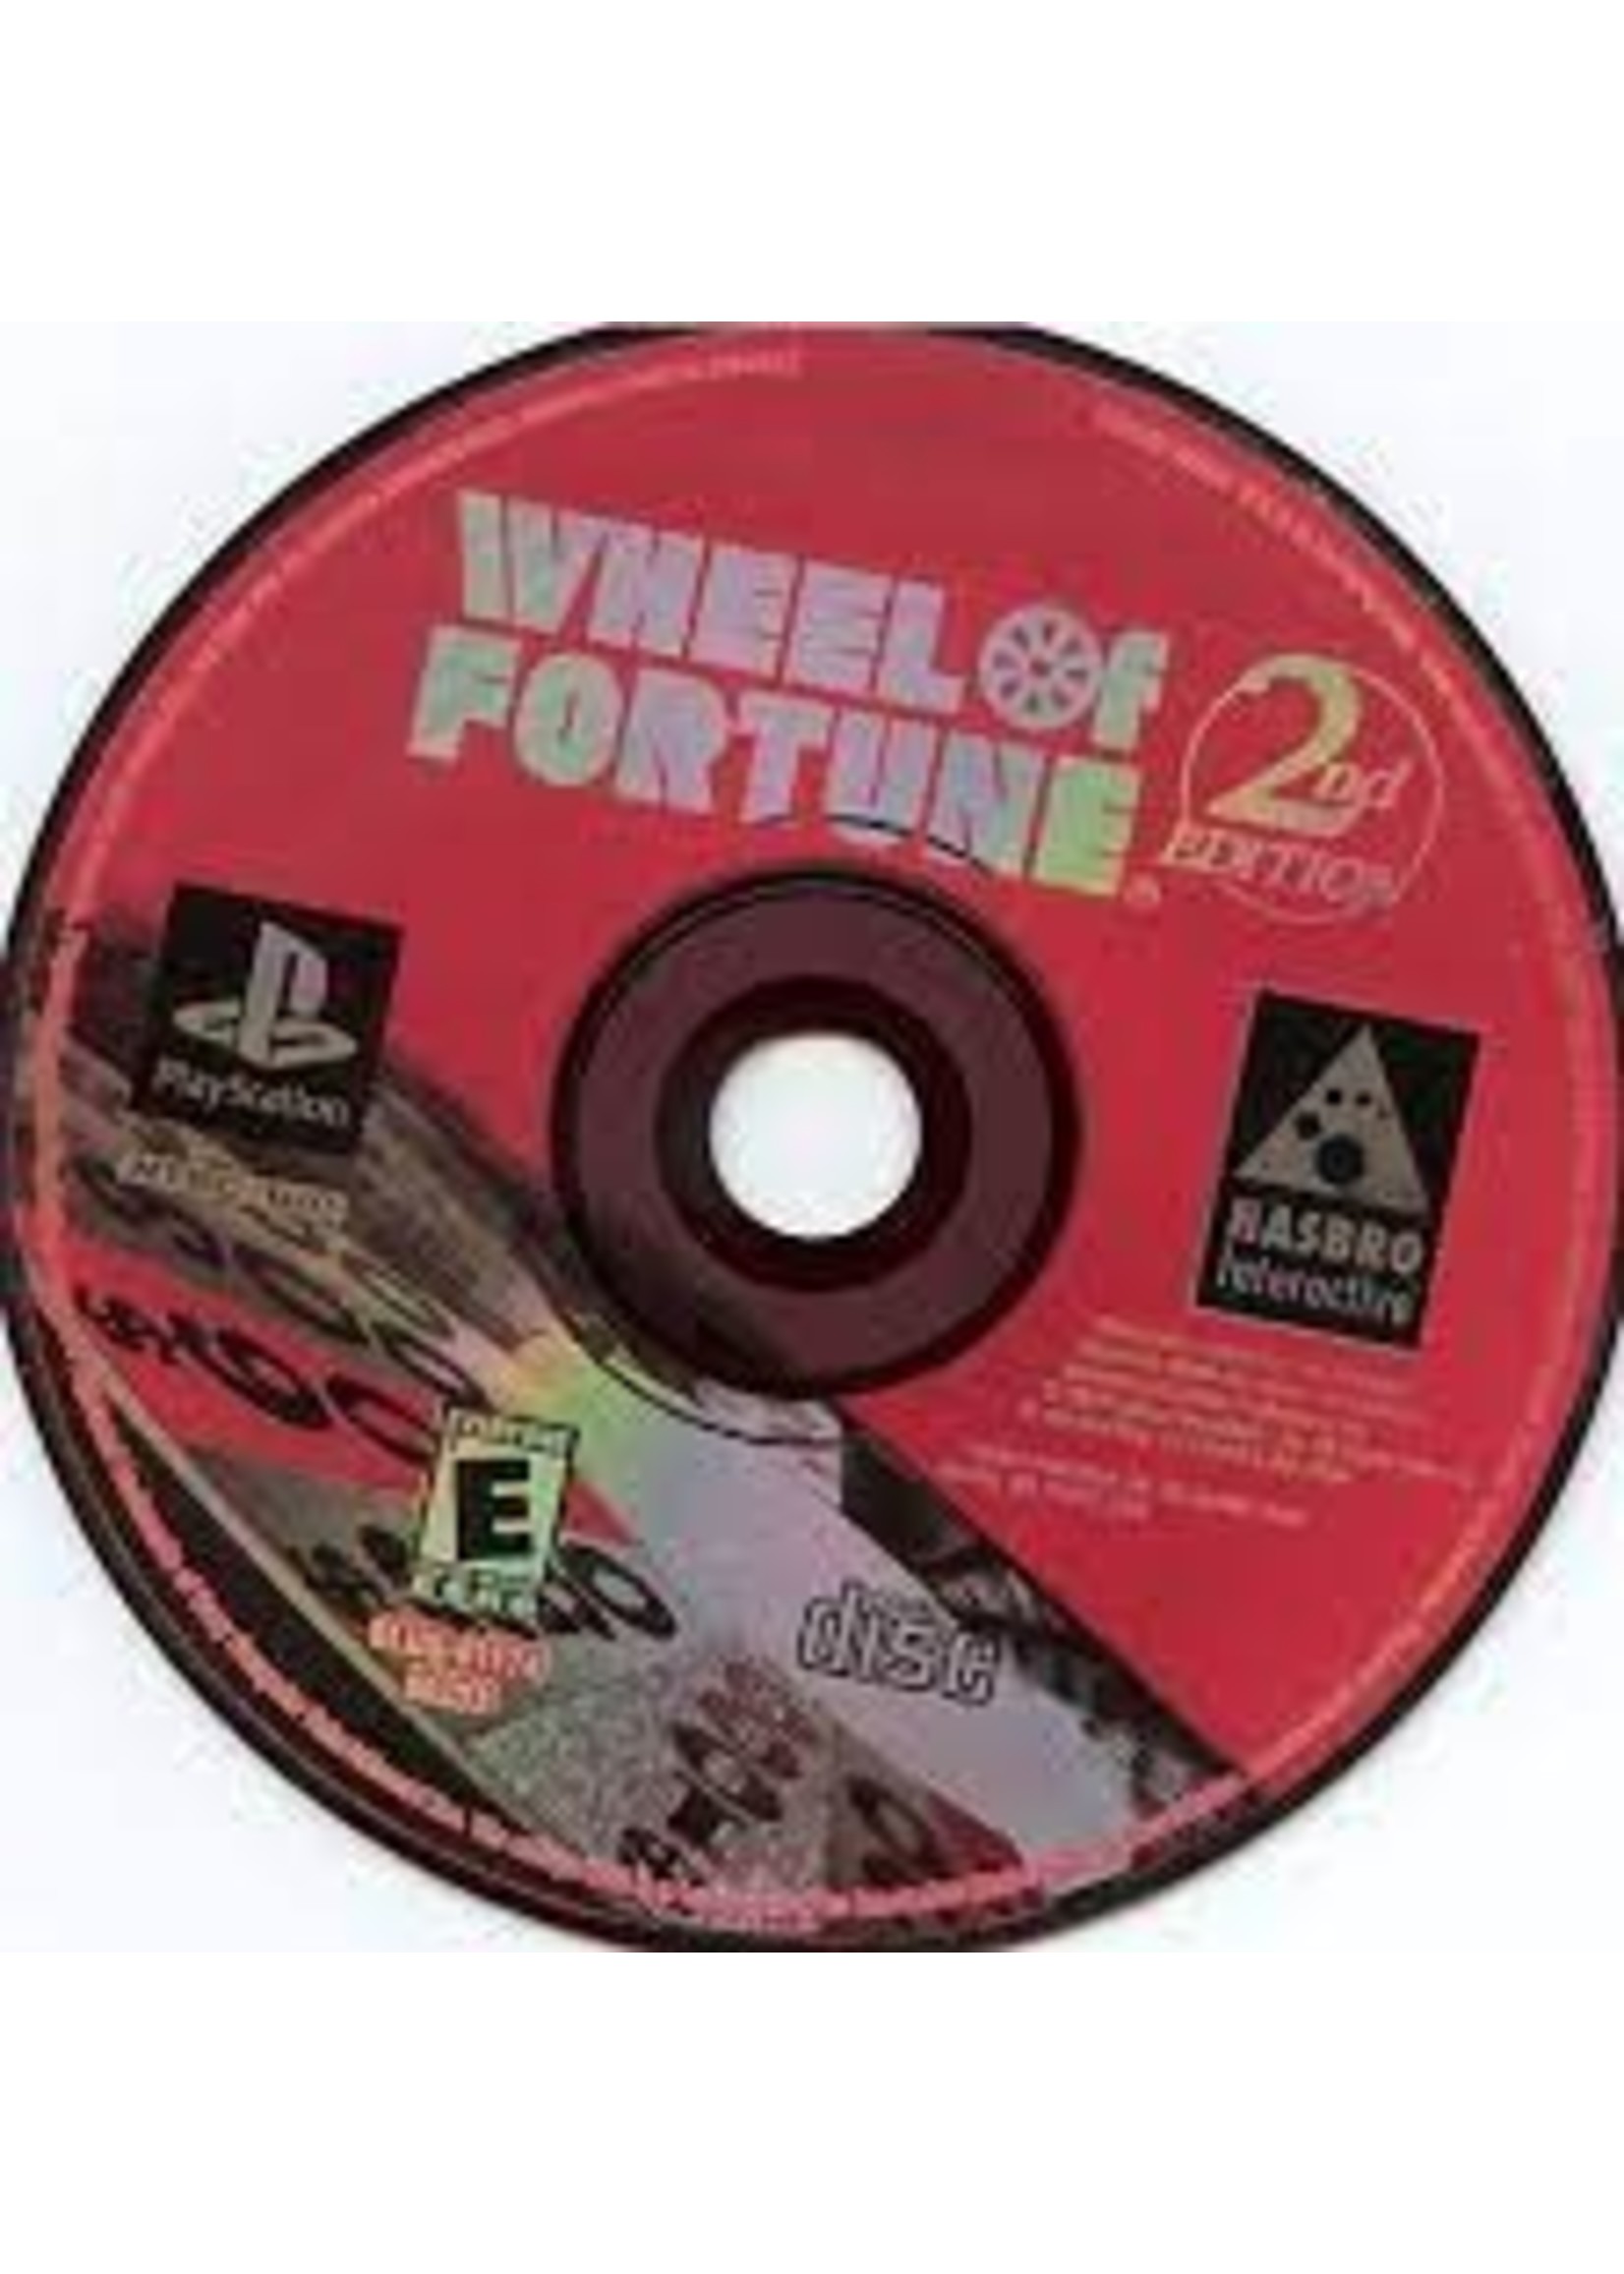 Sony Playstation 1 (PS1) Wheel of Fortune 2nd Edition - Print